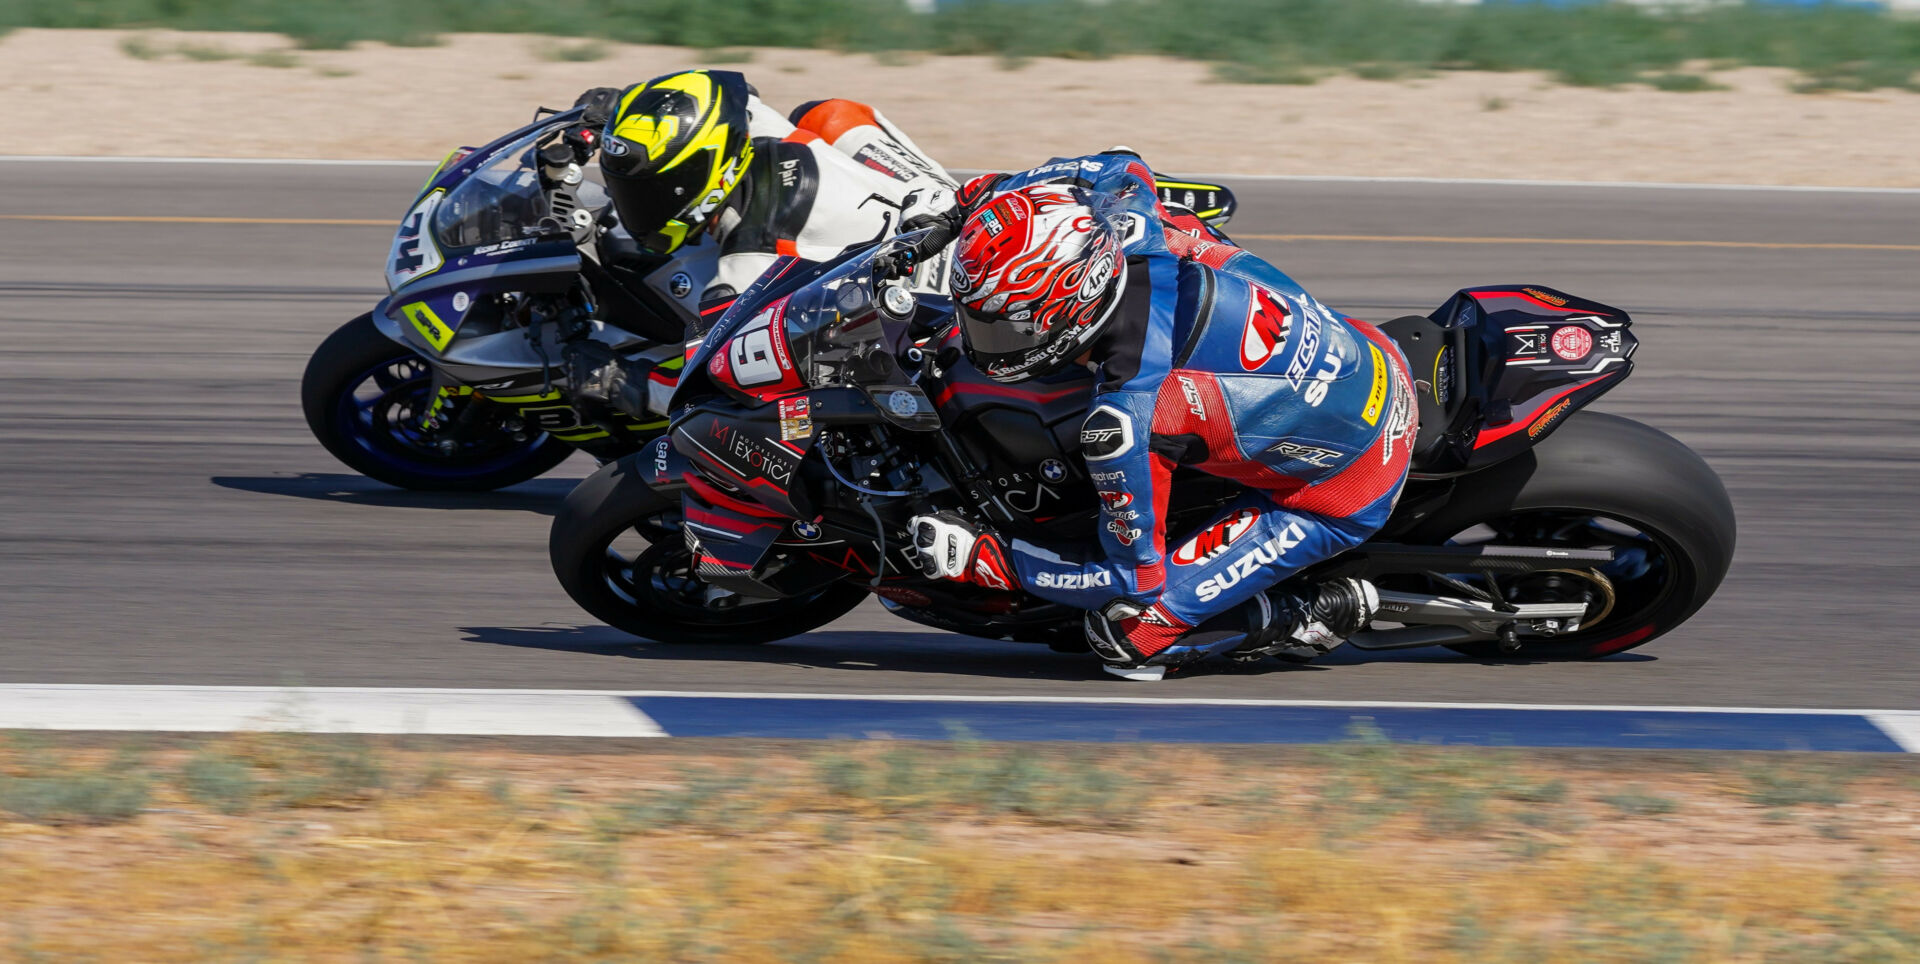 Wyatt Farris (19) held off Bryce Prince (74) to win the CRA Gold Cup race at the Podium Club at Attesa, in Arizona. Photo by Moses Martinez/CinePixelProductions.com, courtesy CRA.